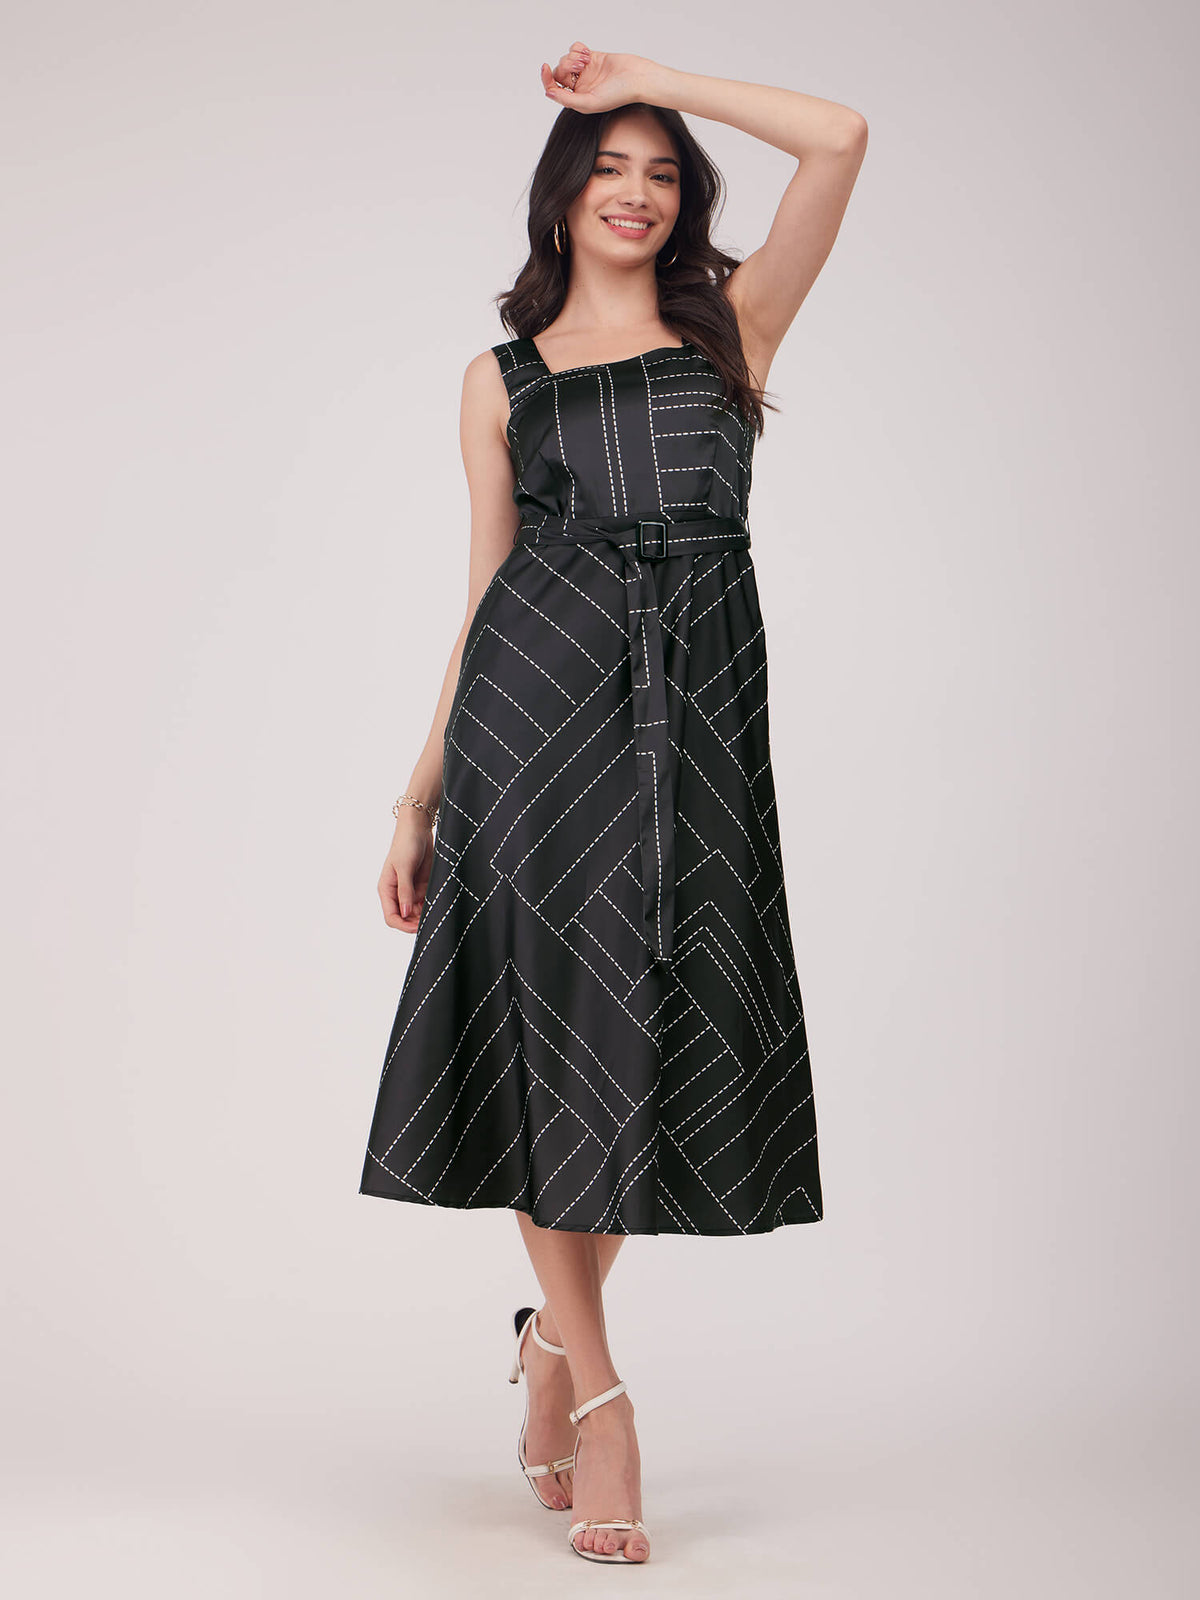 Stretch Satin Fit And Flare Dress - Black